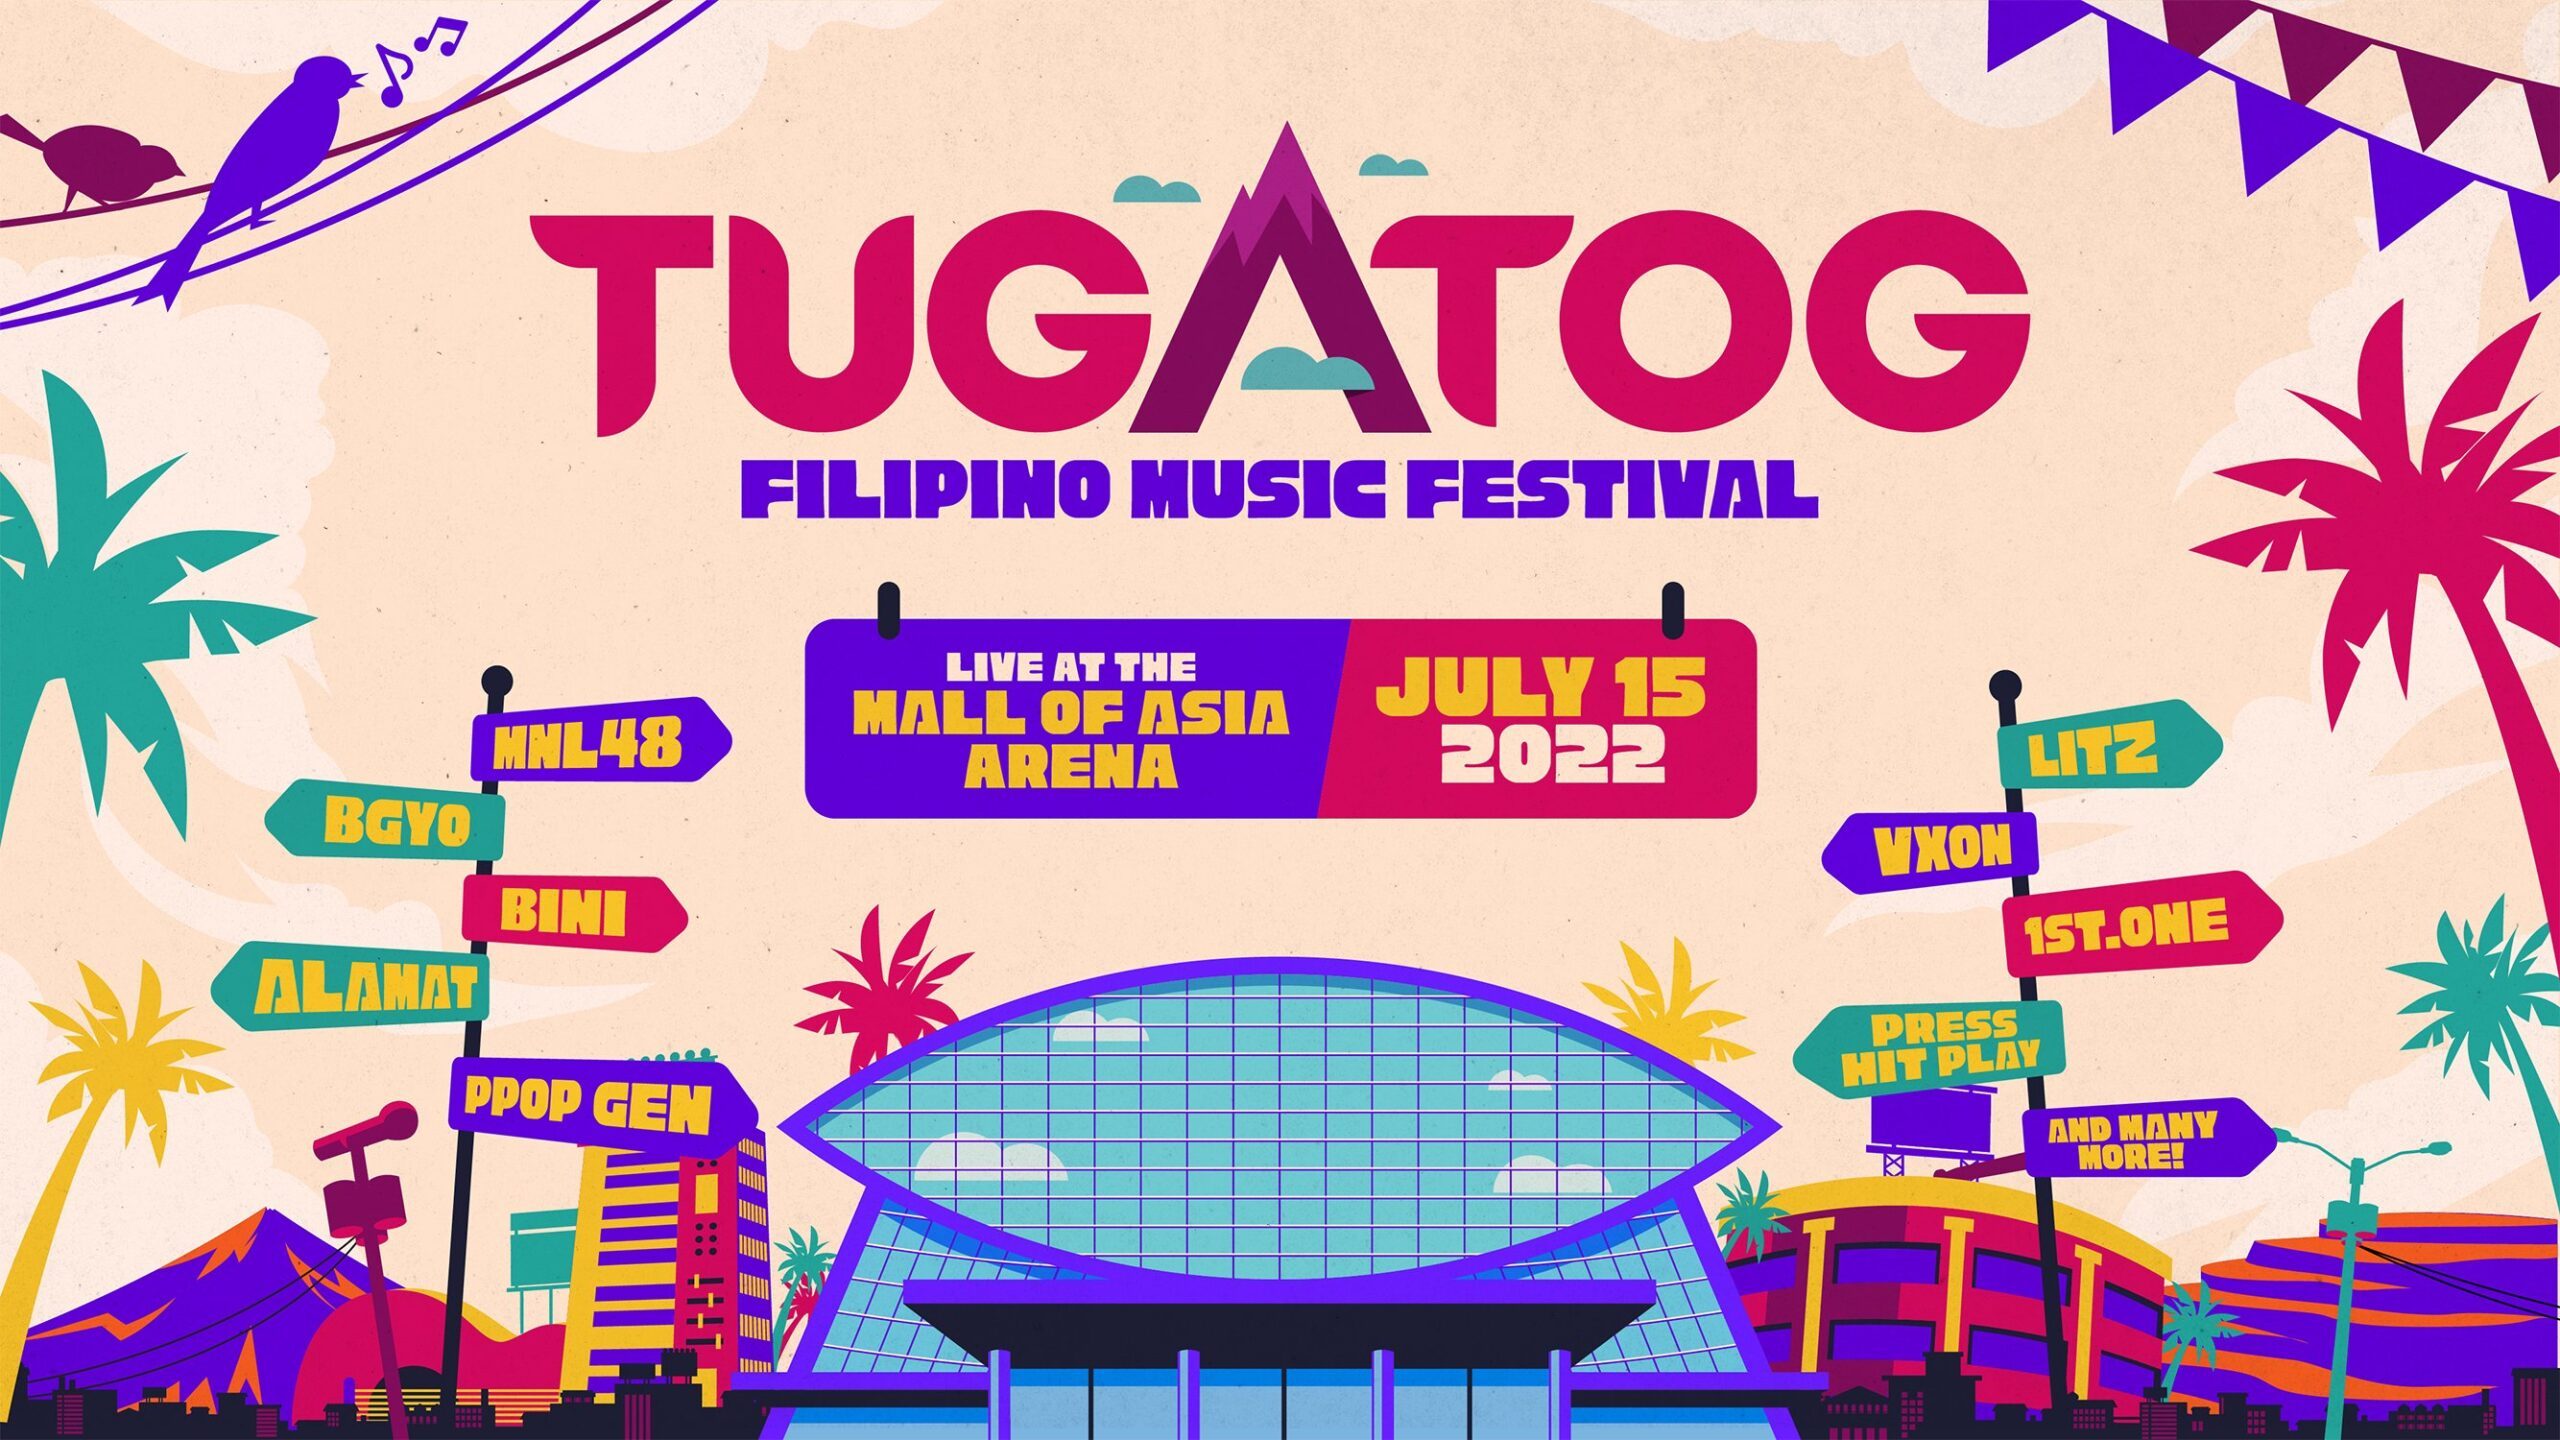 MNL48, ALAMAT, VXON to perform live at Tugatog festival in July